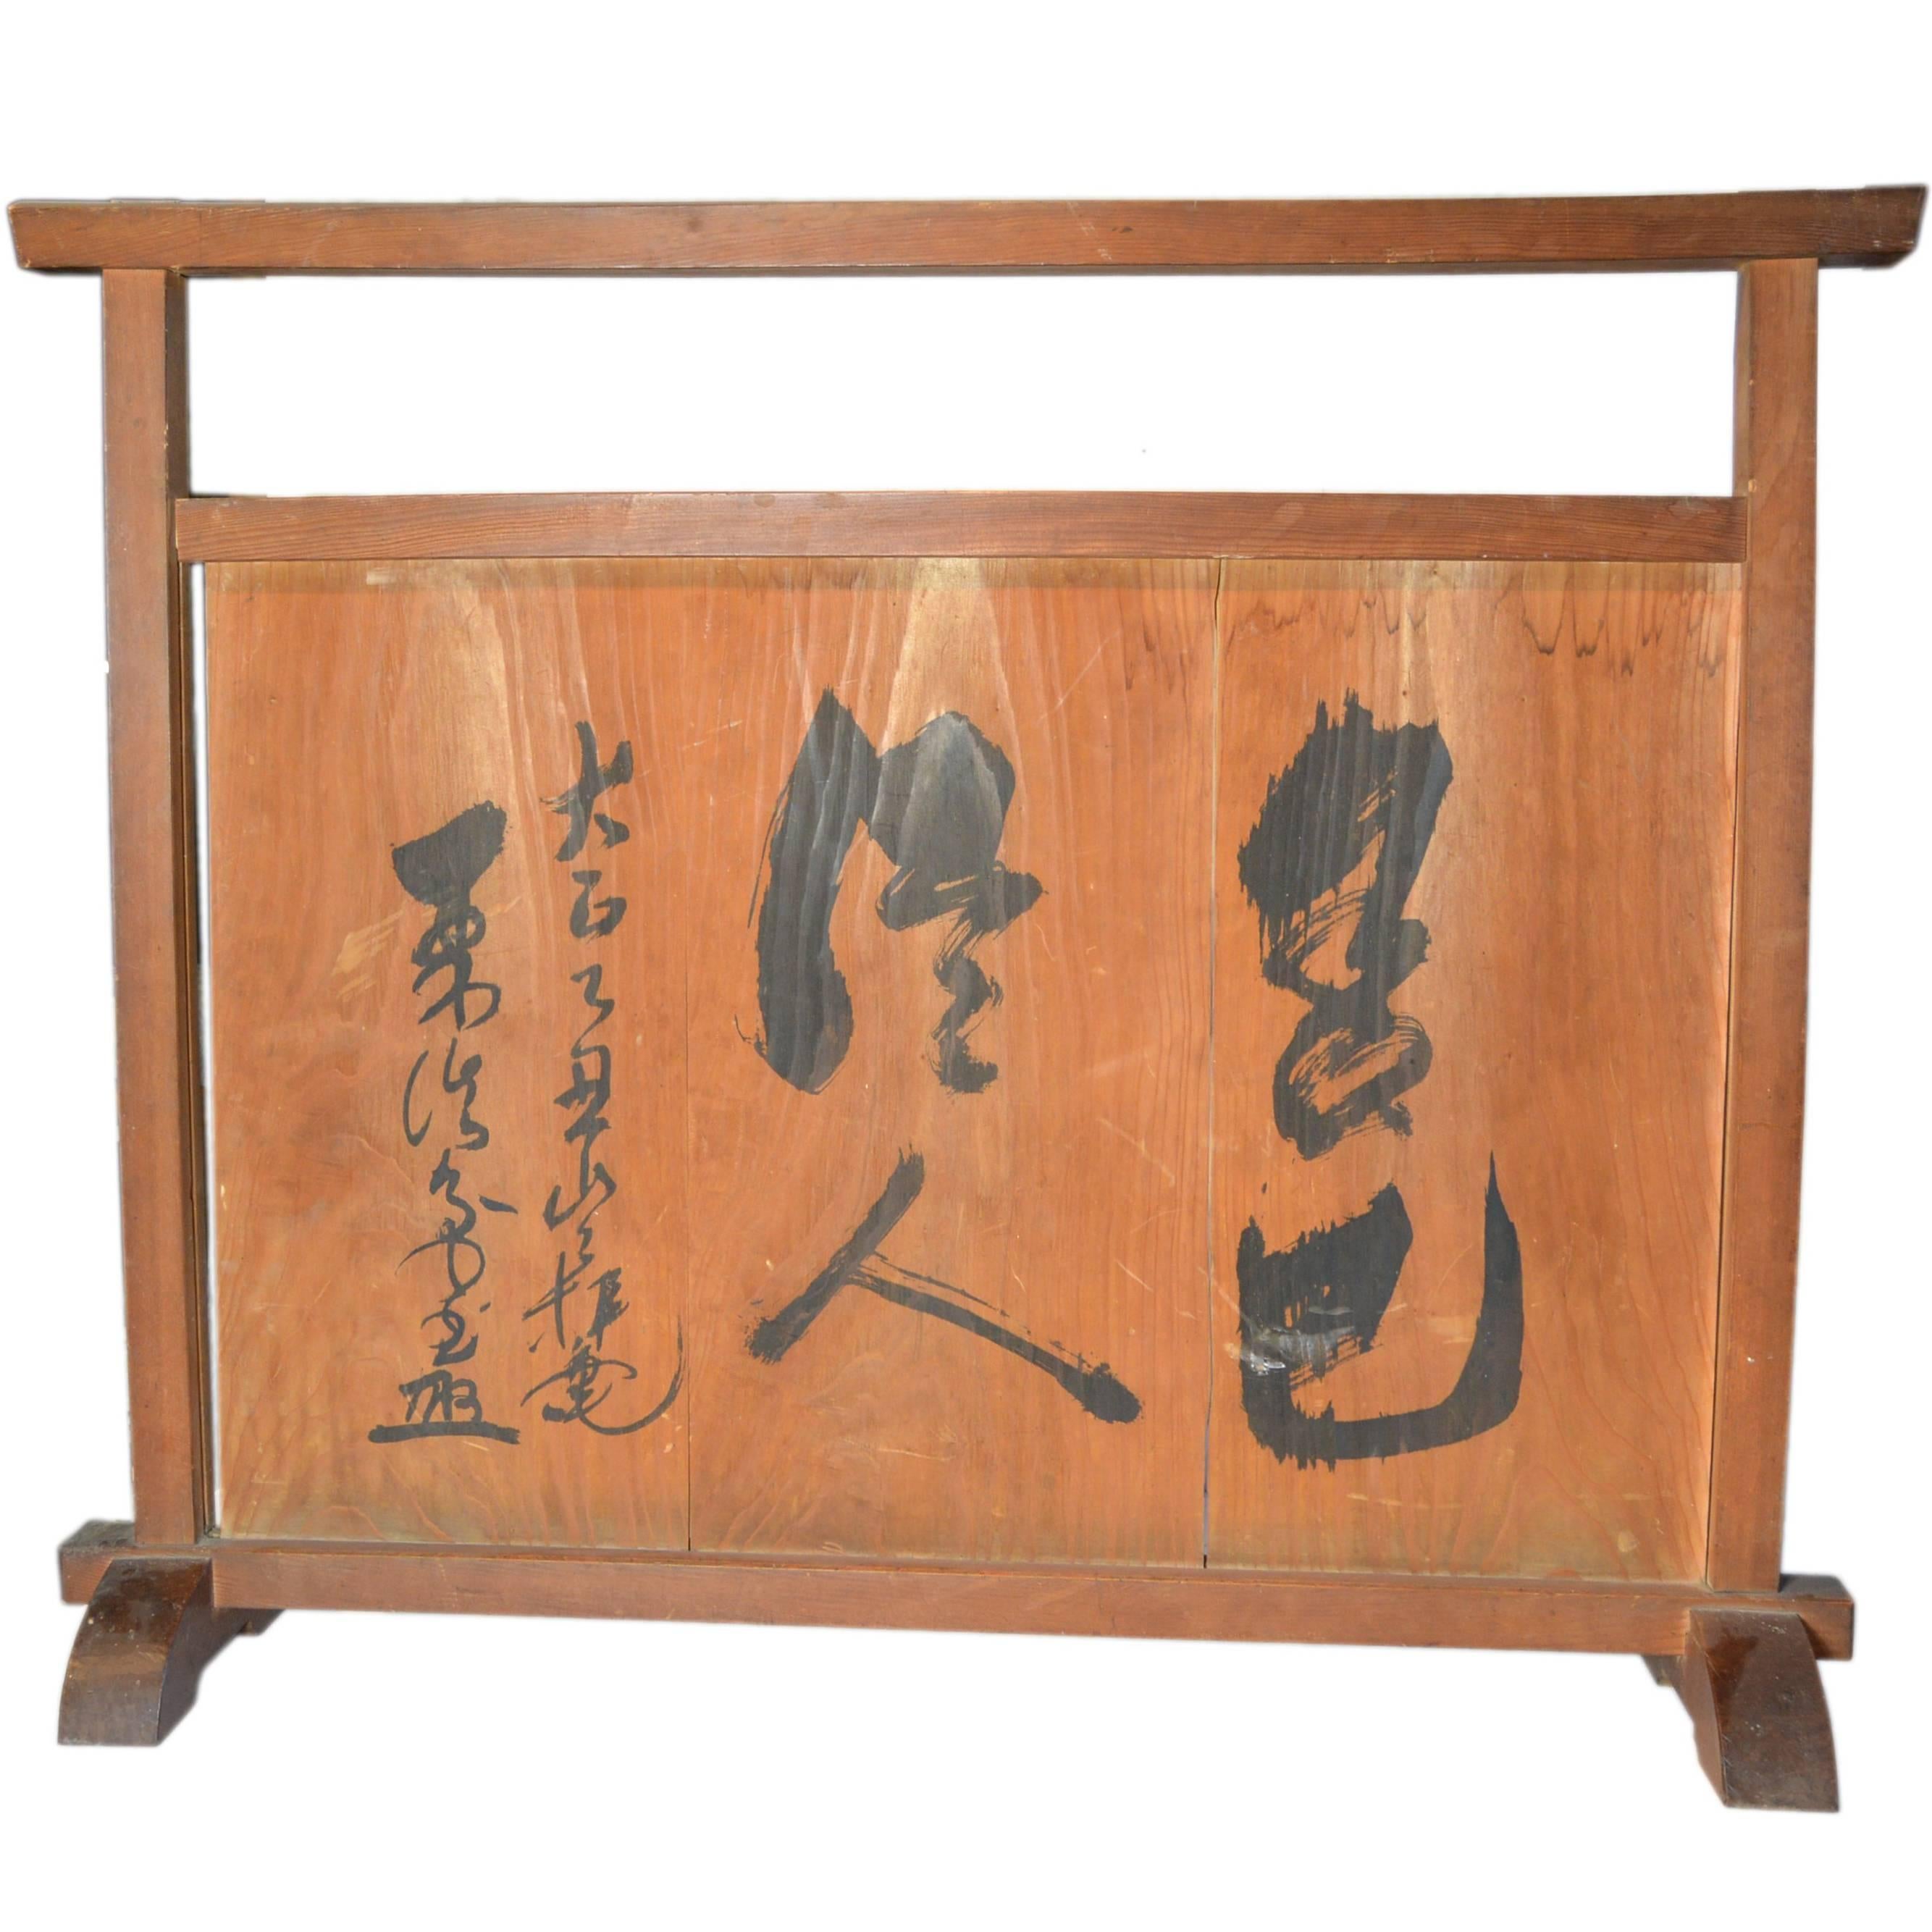 Unusual Antique Chinese Divider with Calligraphy For Sale